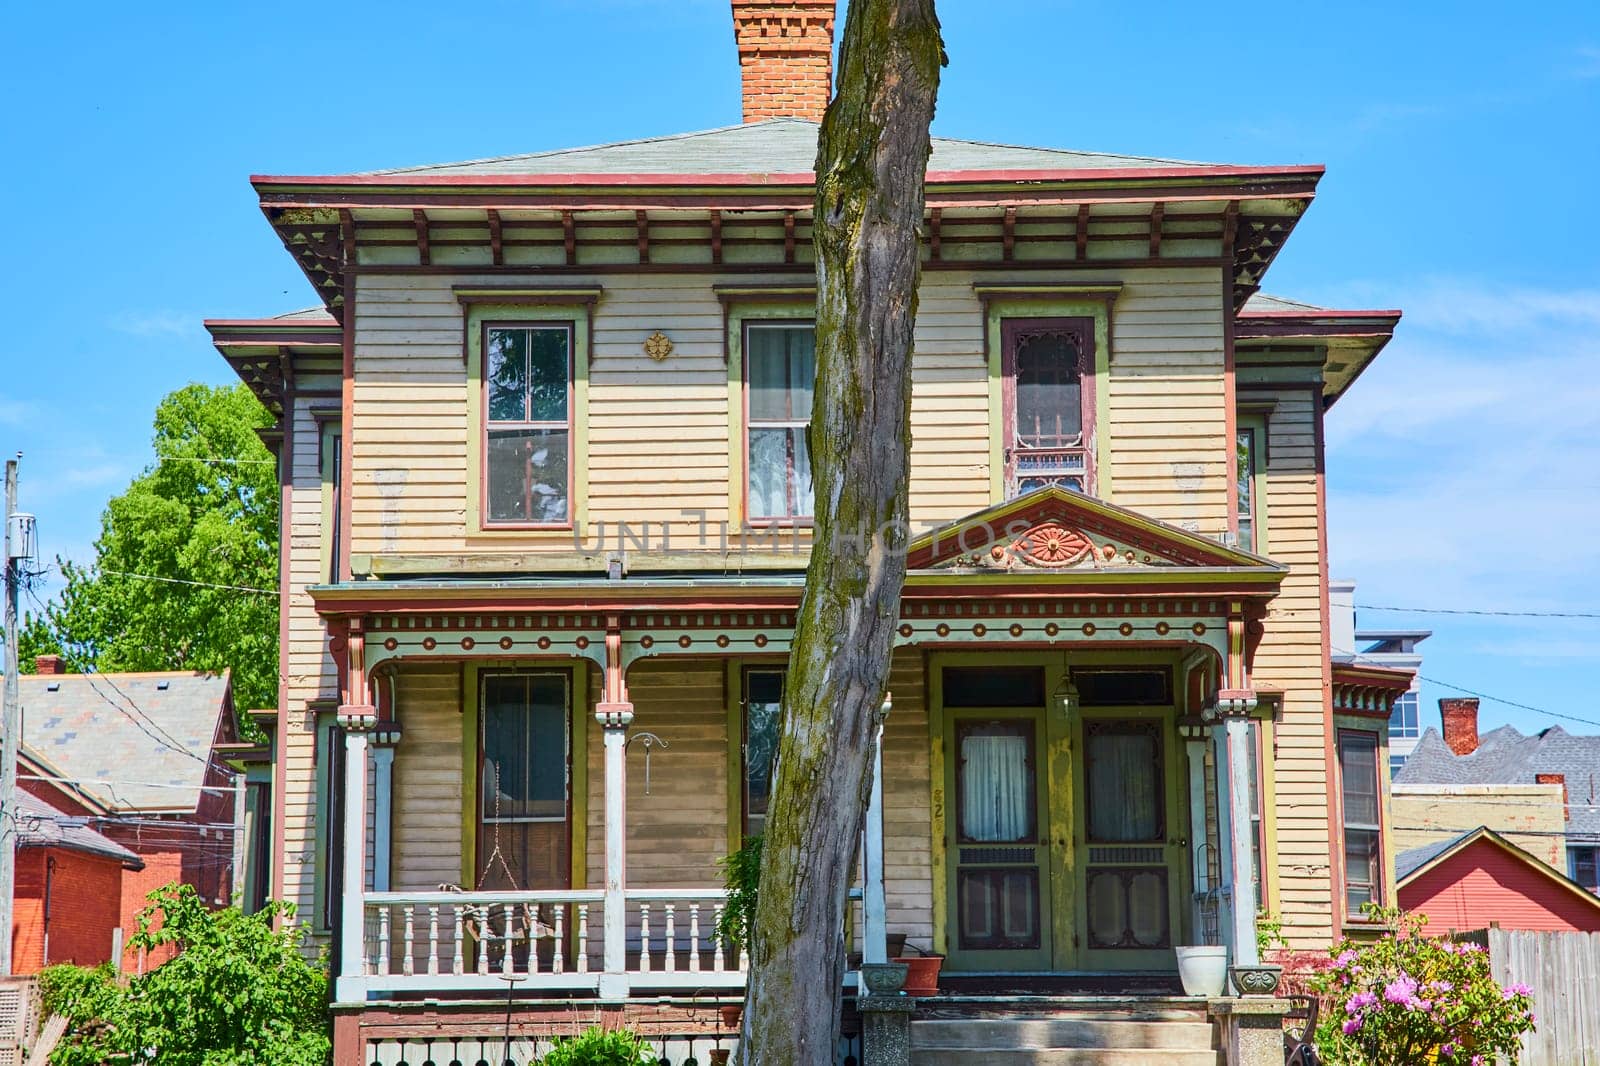 Victorian charm in Fort Wayne: A historic home with ornate trimmings and a weathered tree, set against a clear blue sky.